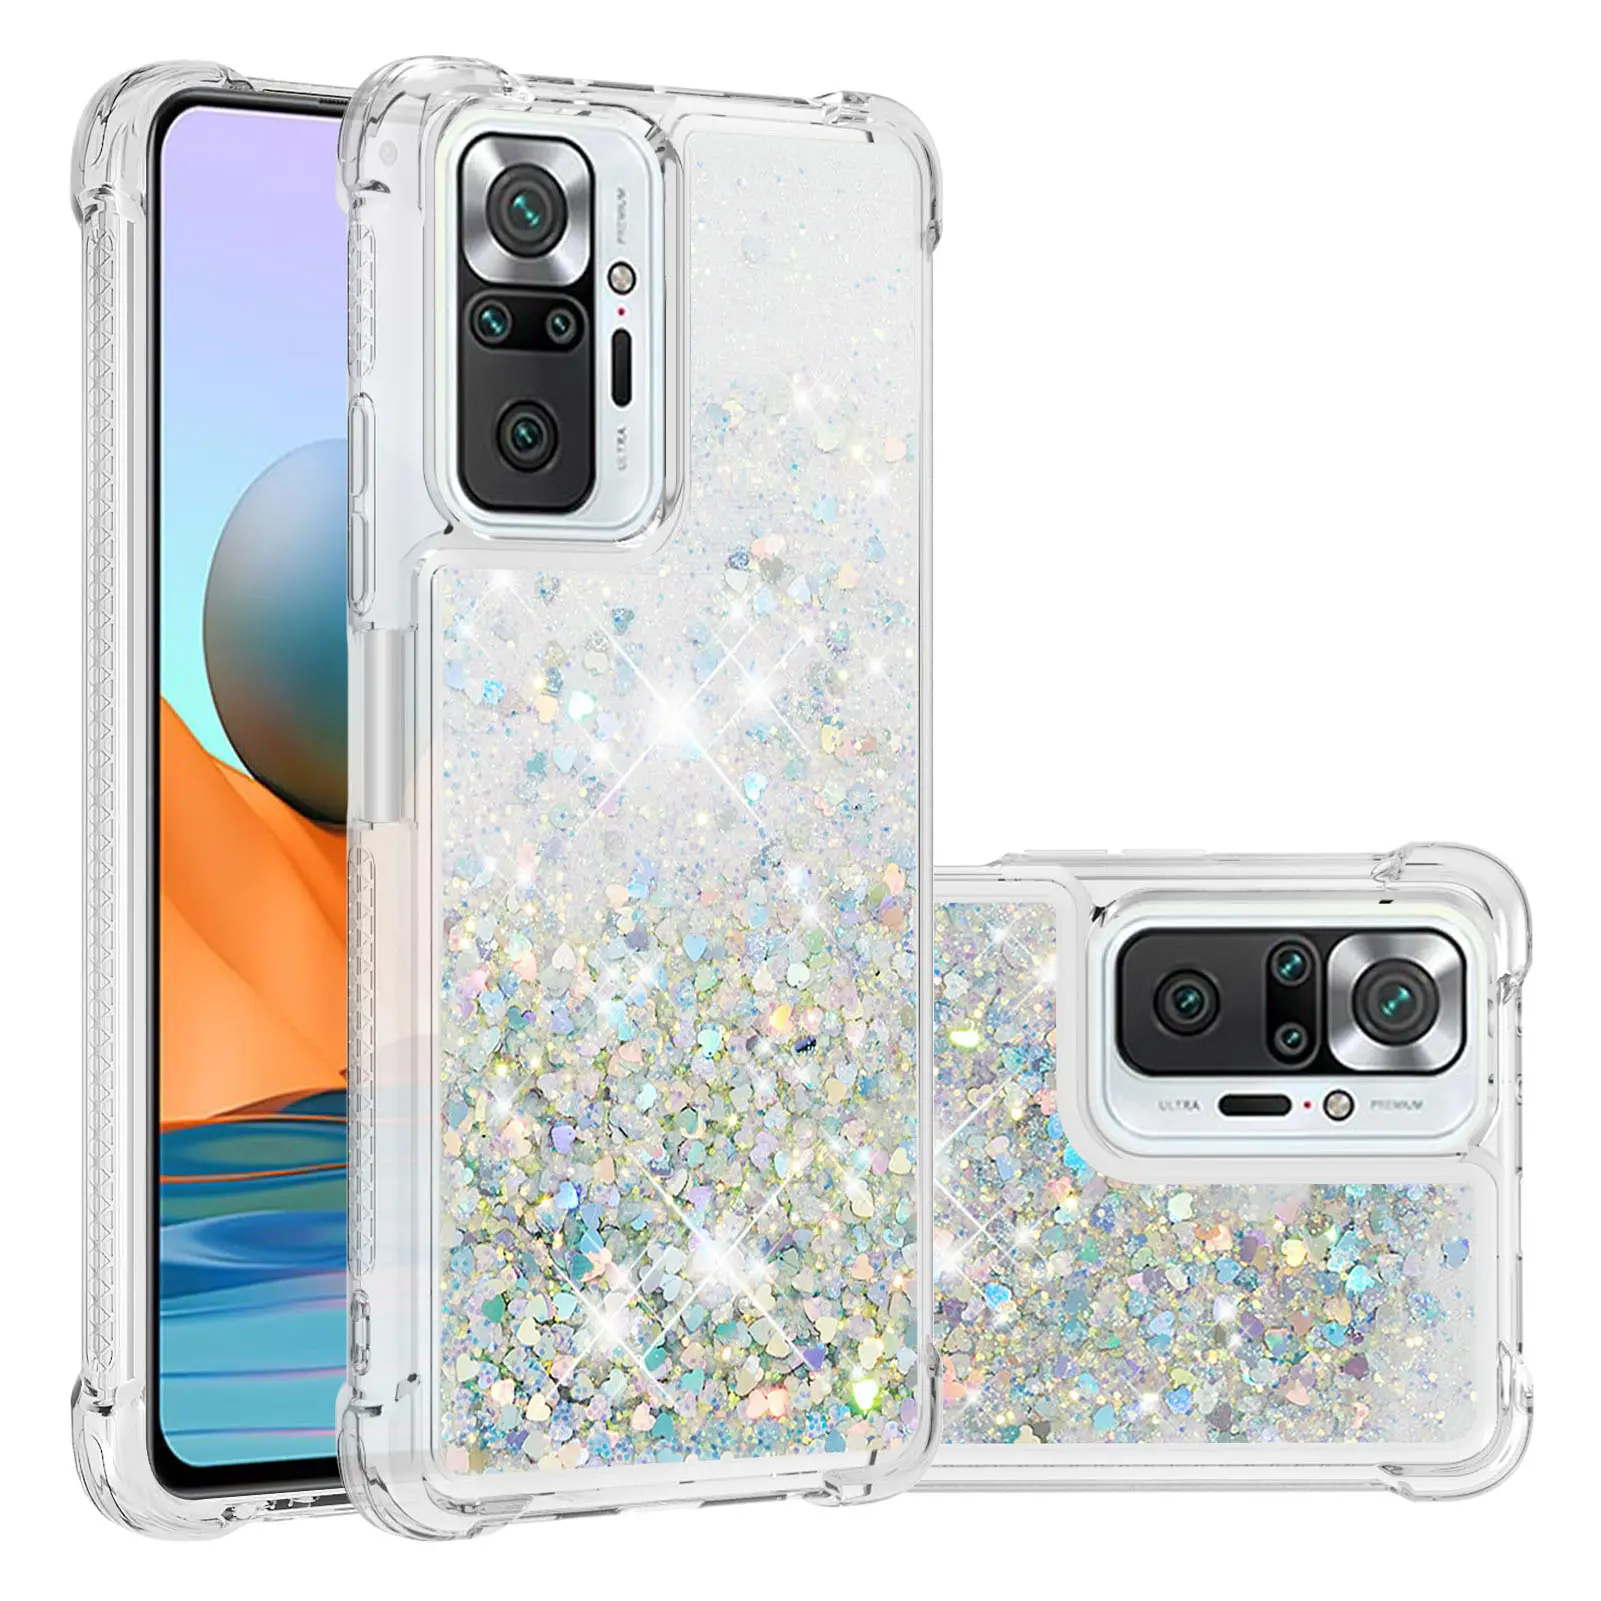 Luxury Gradient Glitter Star Phone Case For Redmi 10 Note 10 pro Max 10s 9s Note9 8 Pro 7A 6A Transparent Soft Back Cover